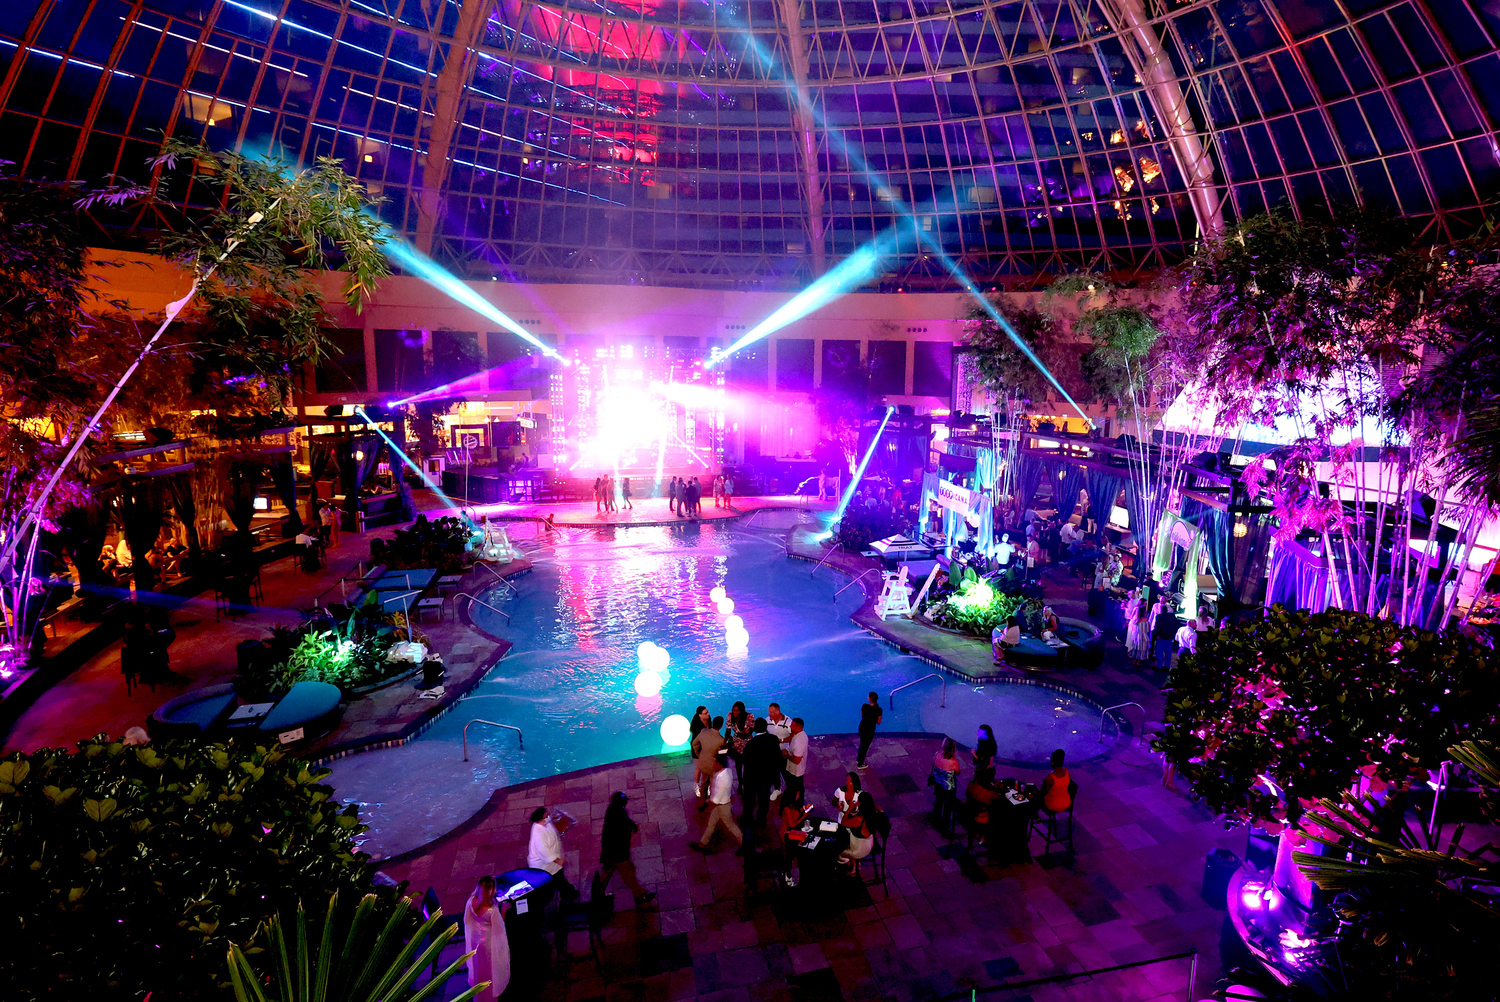 an indoor swimming pool with a domed window ceiling, cabanas and laser lights